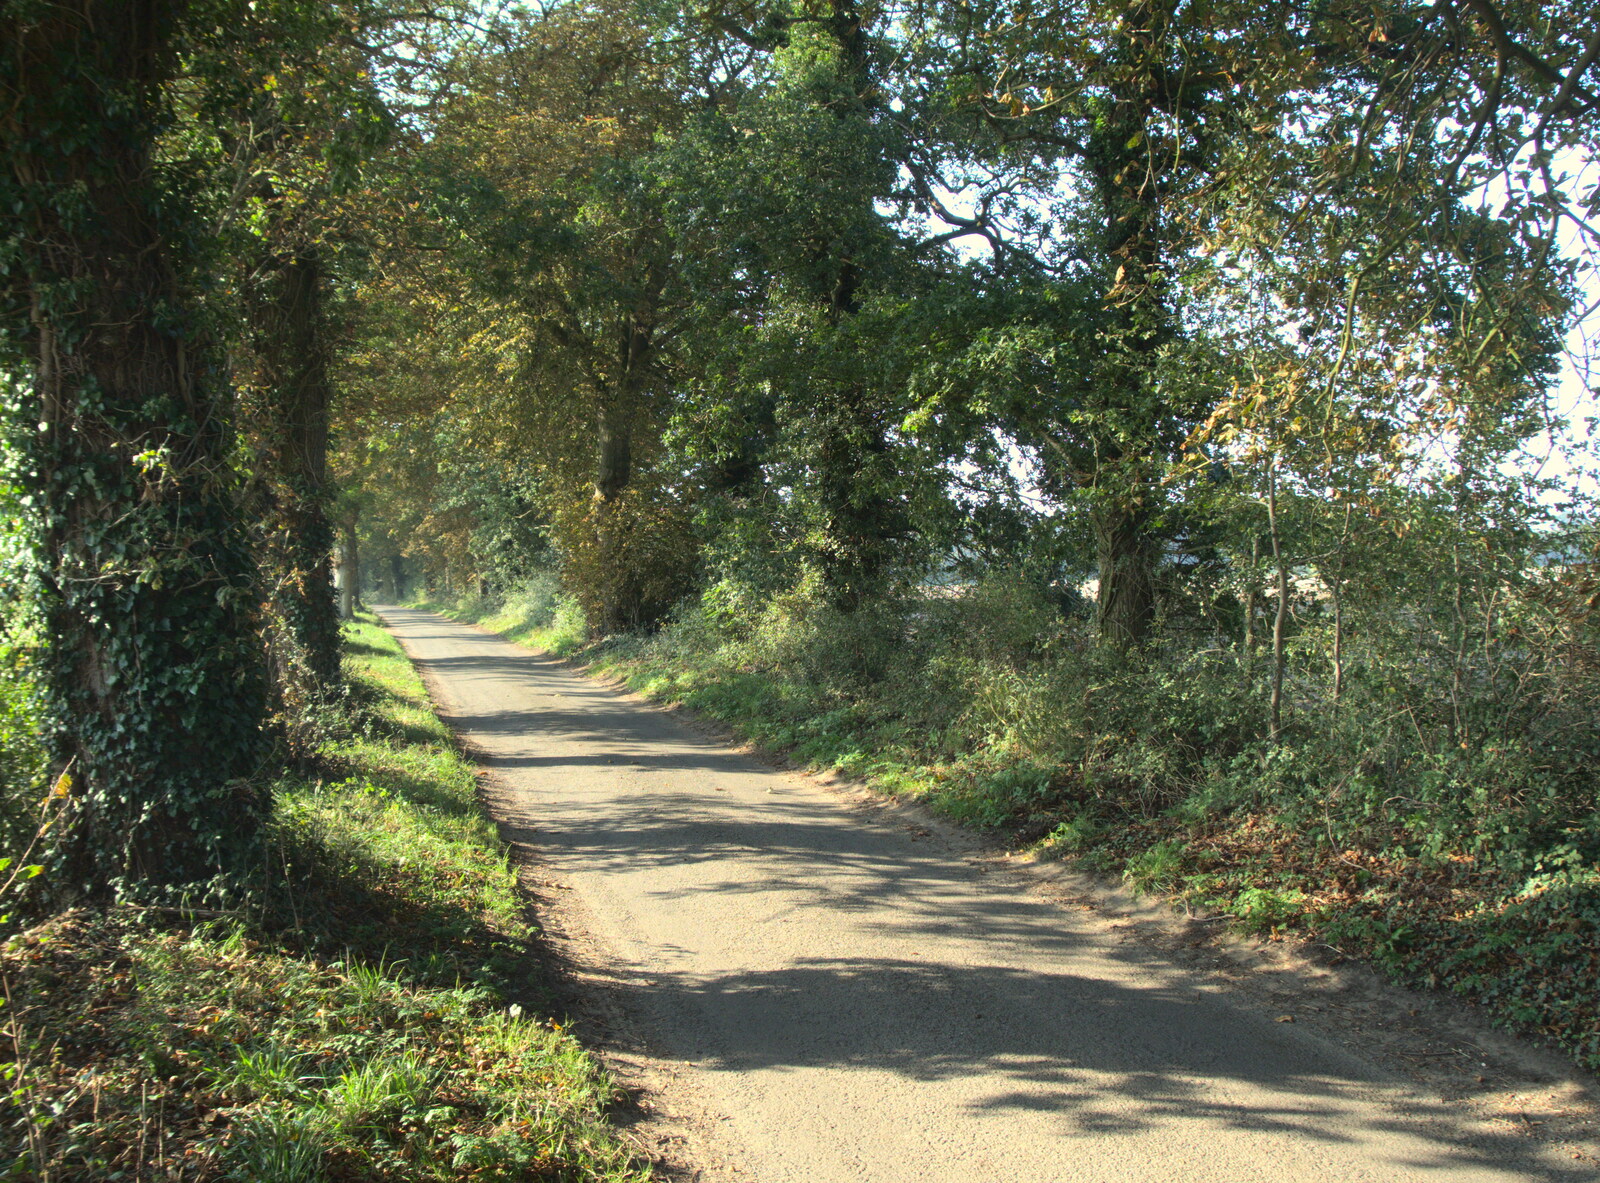 The road to Thornham from The GSB Band Hut and a Miscellany - Gislingham and Brome, Suffolk - 19th September 2020